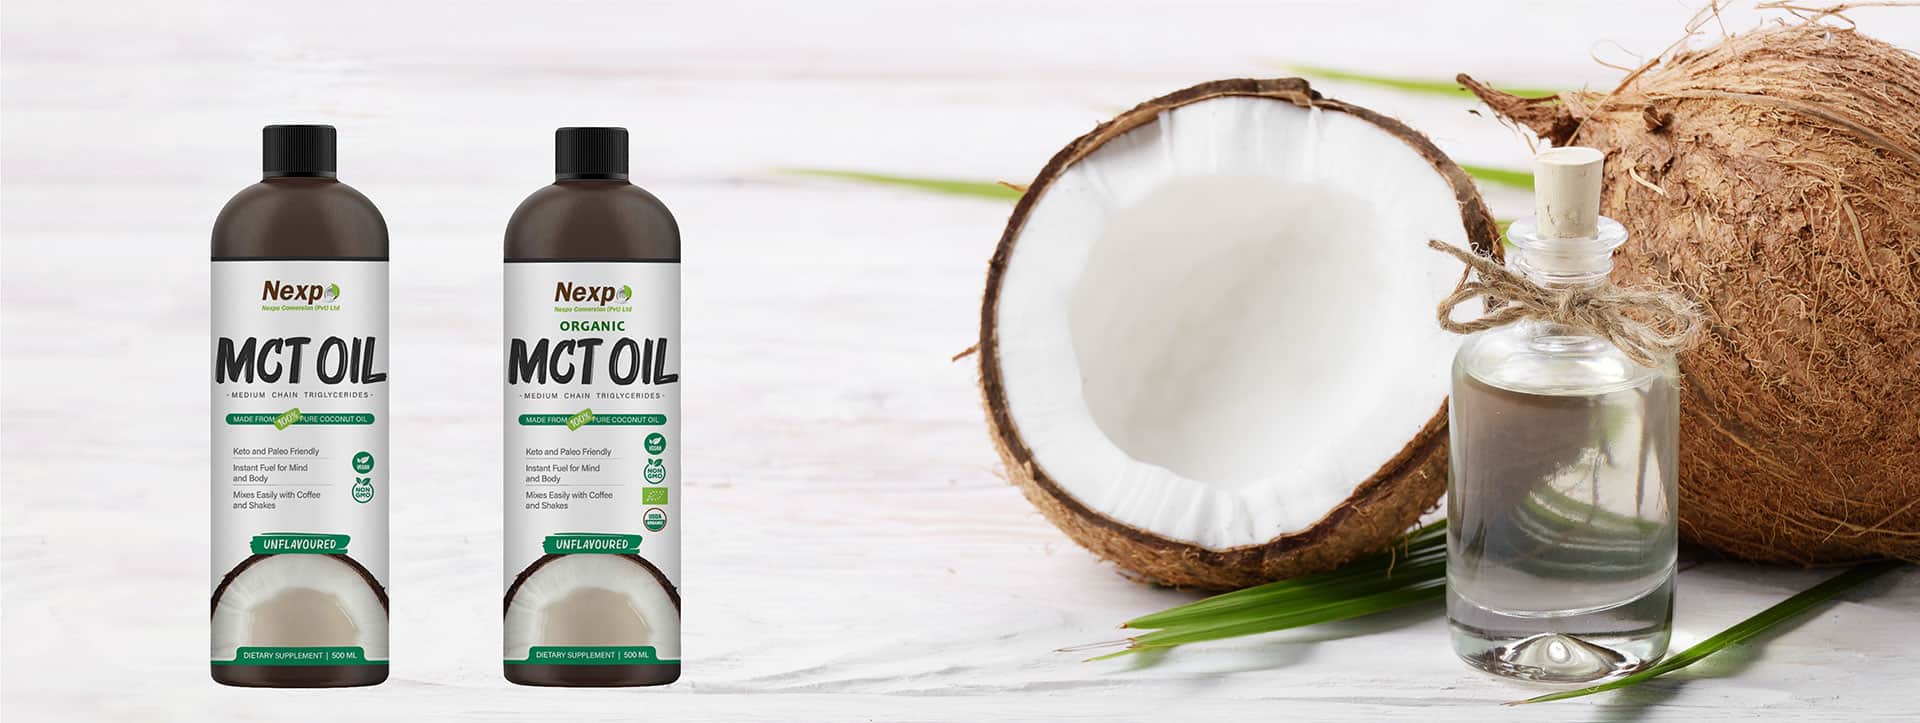 Nexpo-Coconut-MCT-Oil-Landing-Page-Image